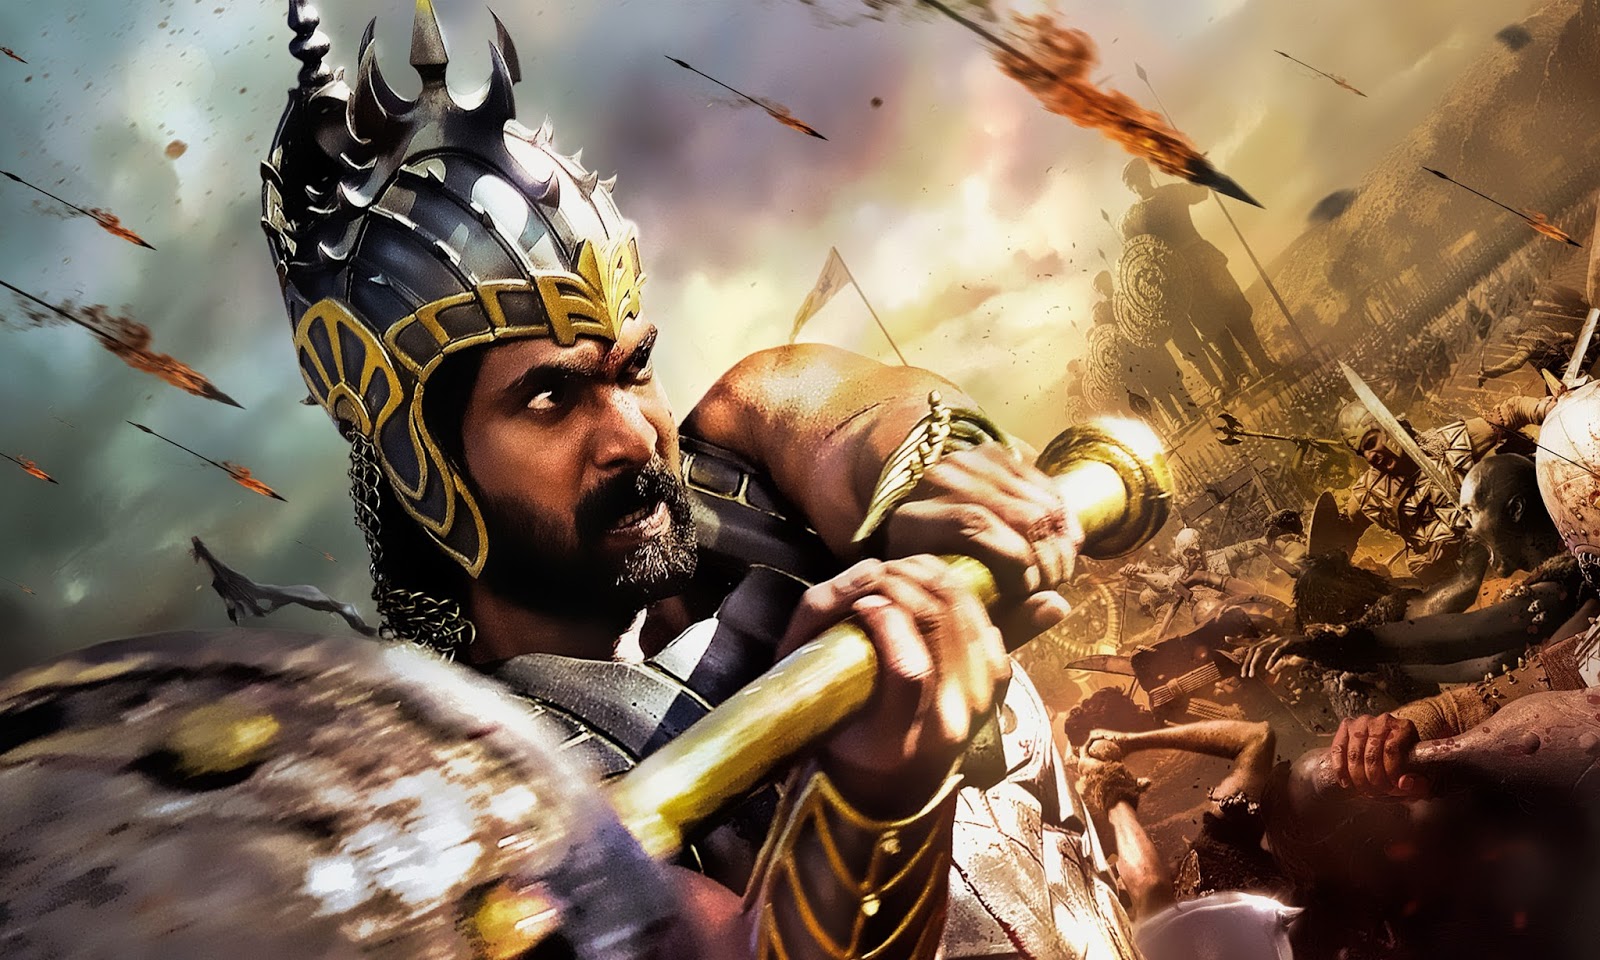 bahubali hd wallpaper,action adventure game,strategy video game,cg artwork,pc game,fictional character